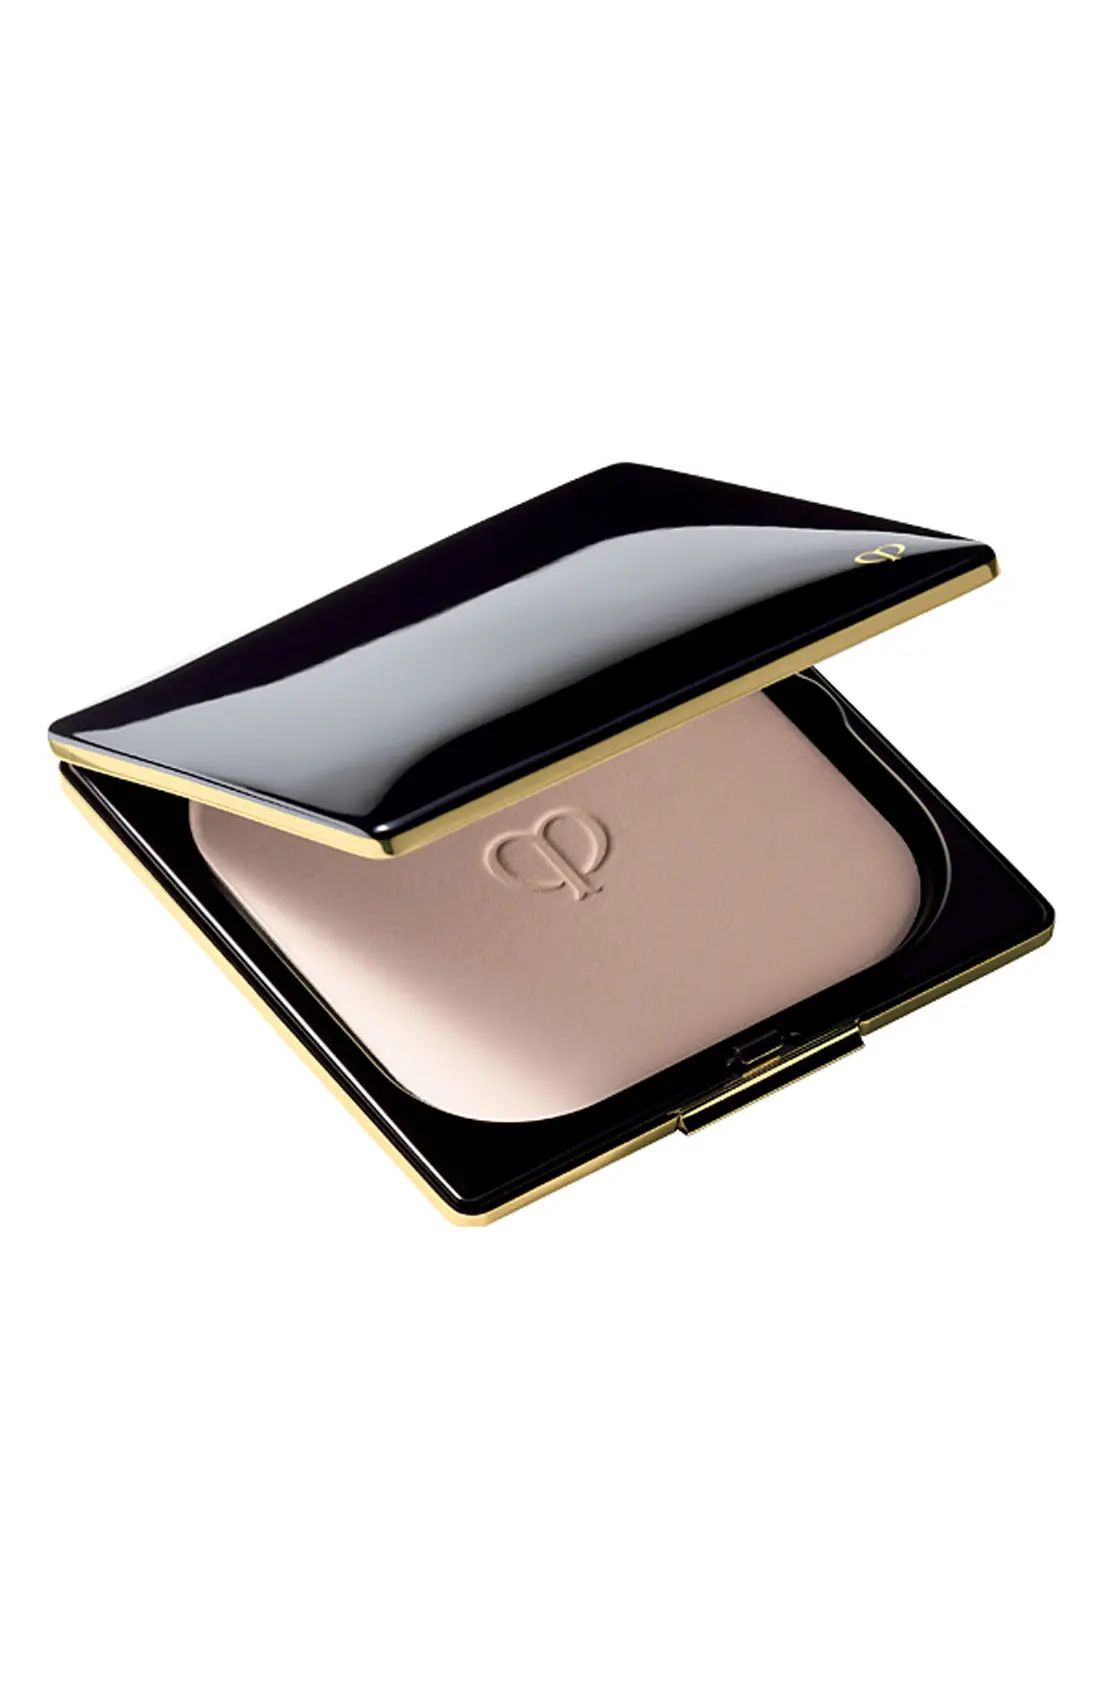 Cle de Peau Beaute Refining Pressed Powder LX at Nordstrom | Nordstrom